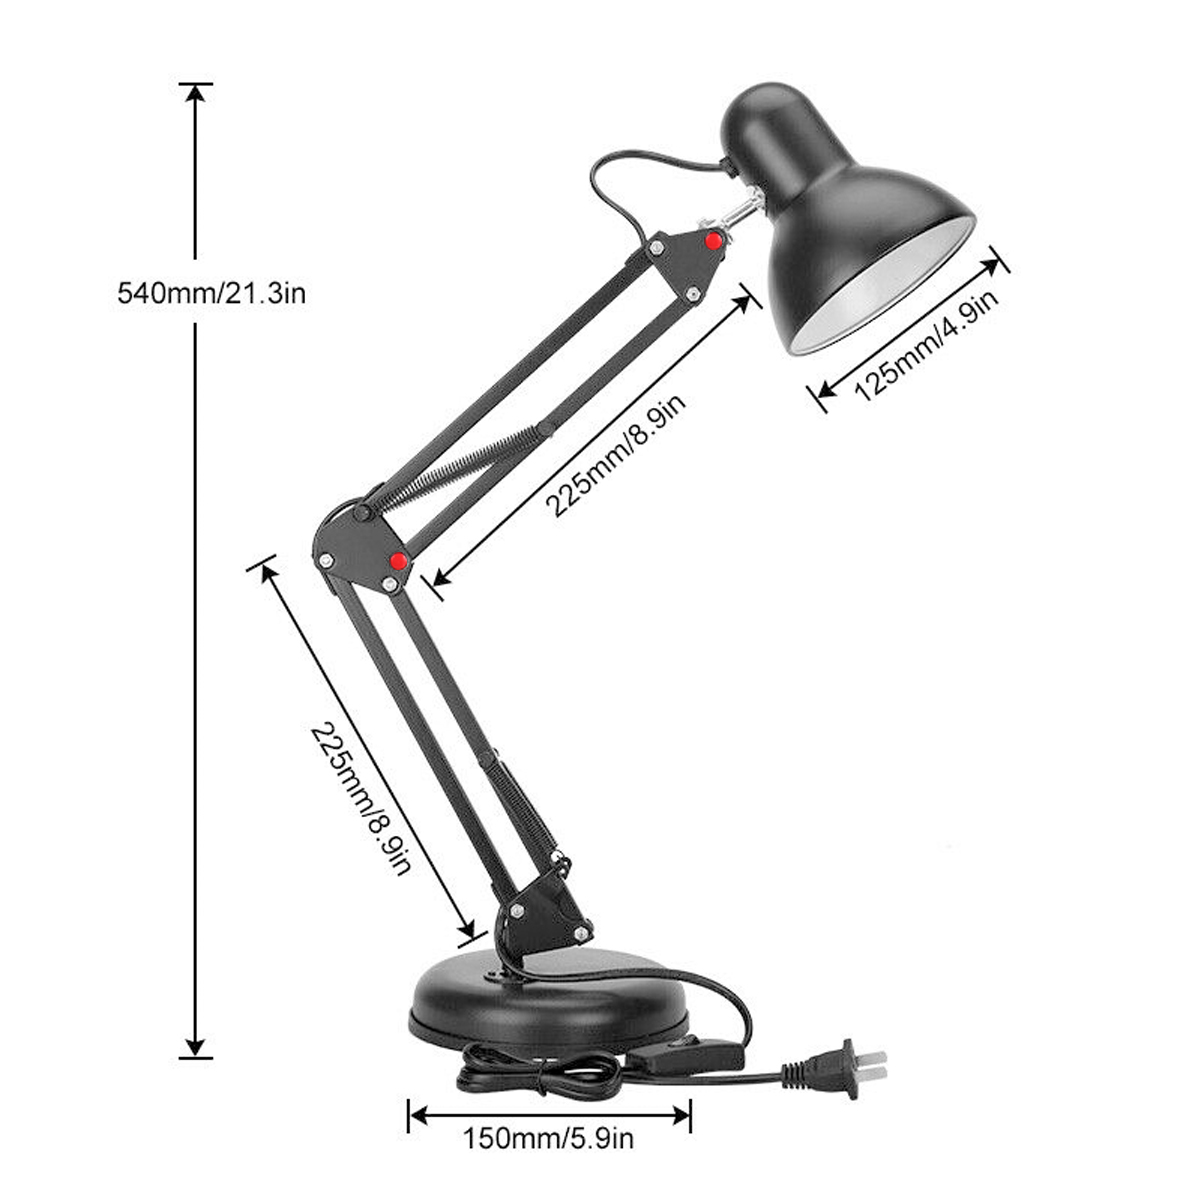 5W-Super-Bright-Swing-Arm-Desk-Lamp-Clamp-on-Table-Light-with-LED-Bulb-Metal-Clip-220V-1742397-3